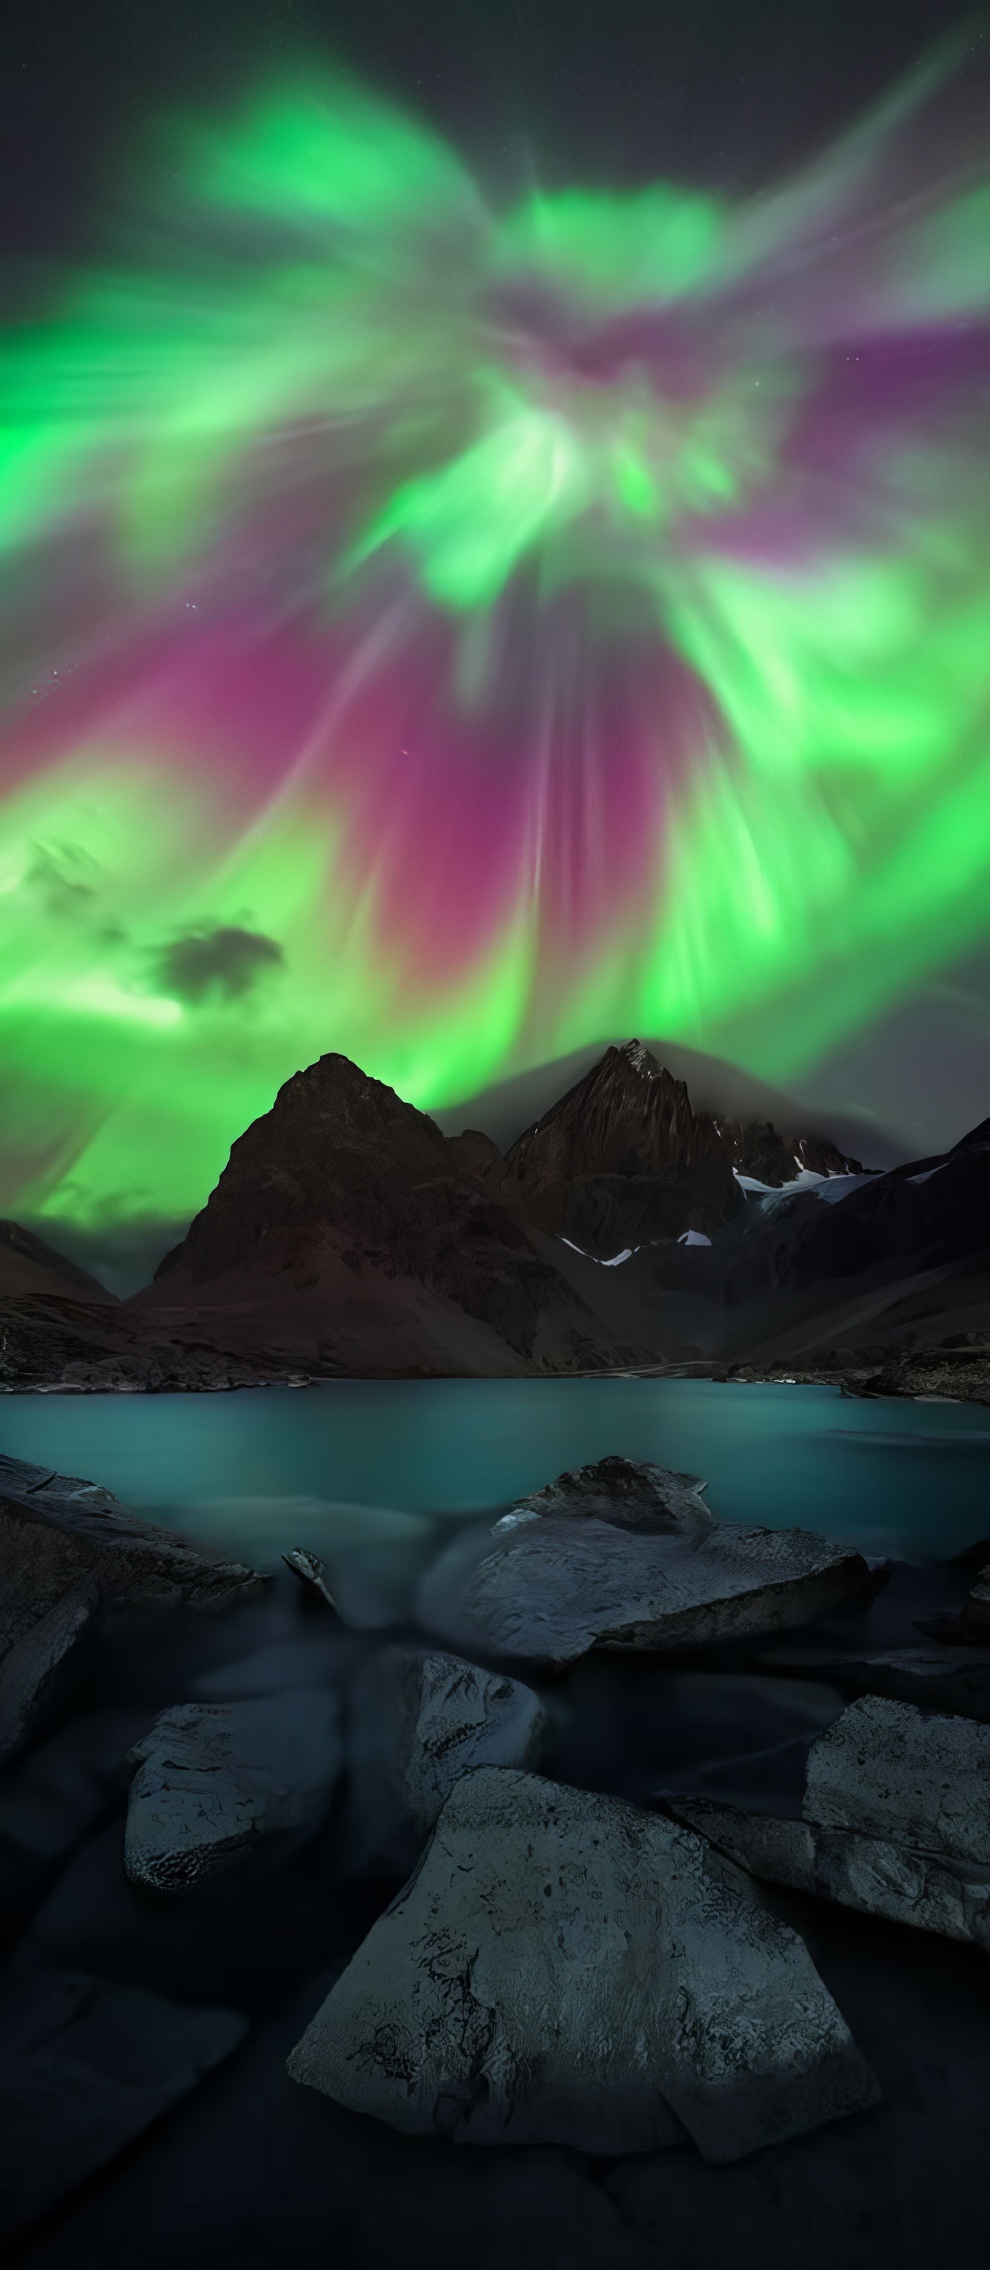 Northern Lights Photographer Of The Year Awards 23 